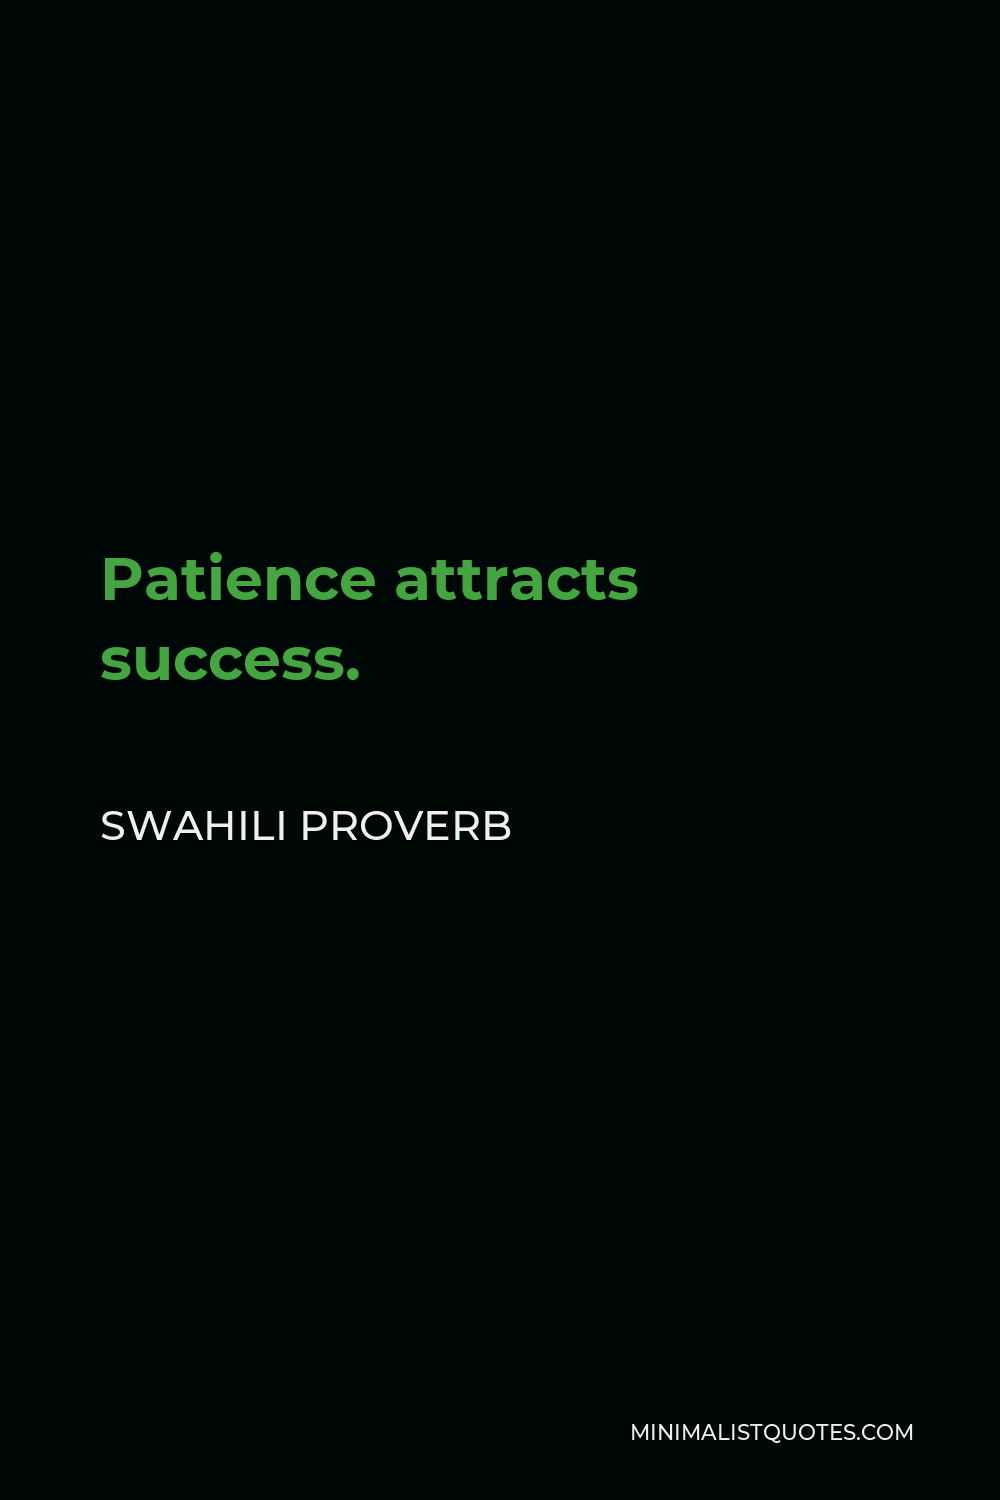 Swahili Proverb Quote - Patience attracts success.